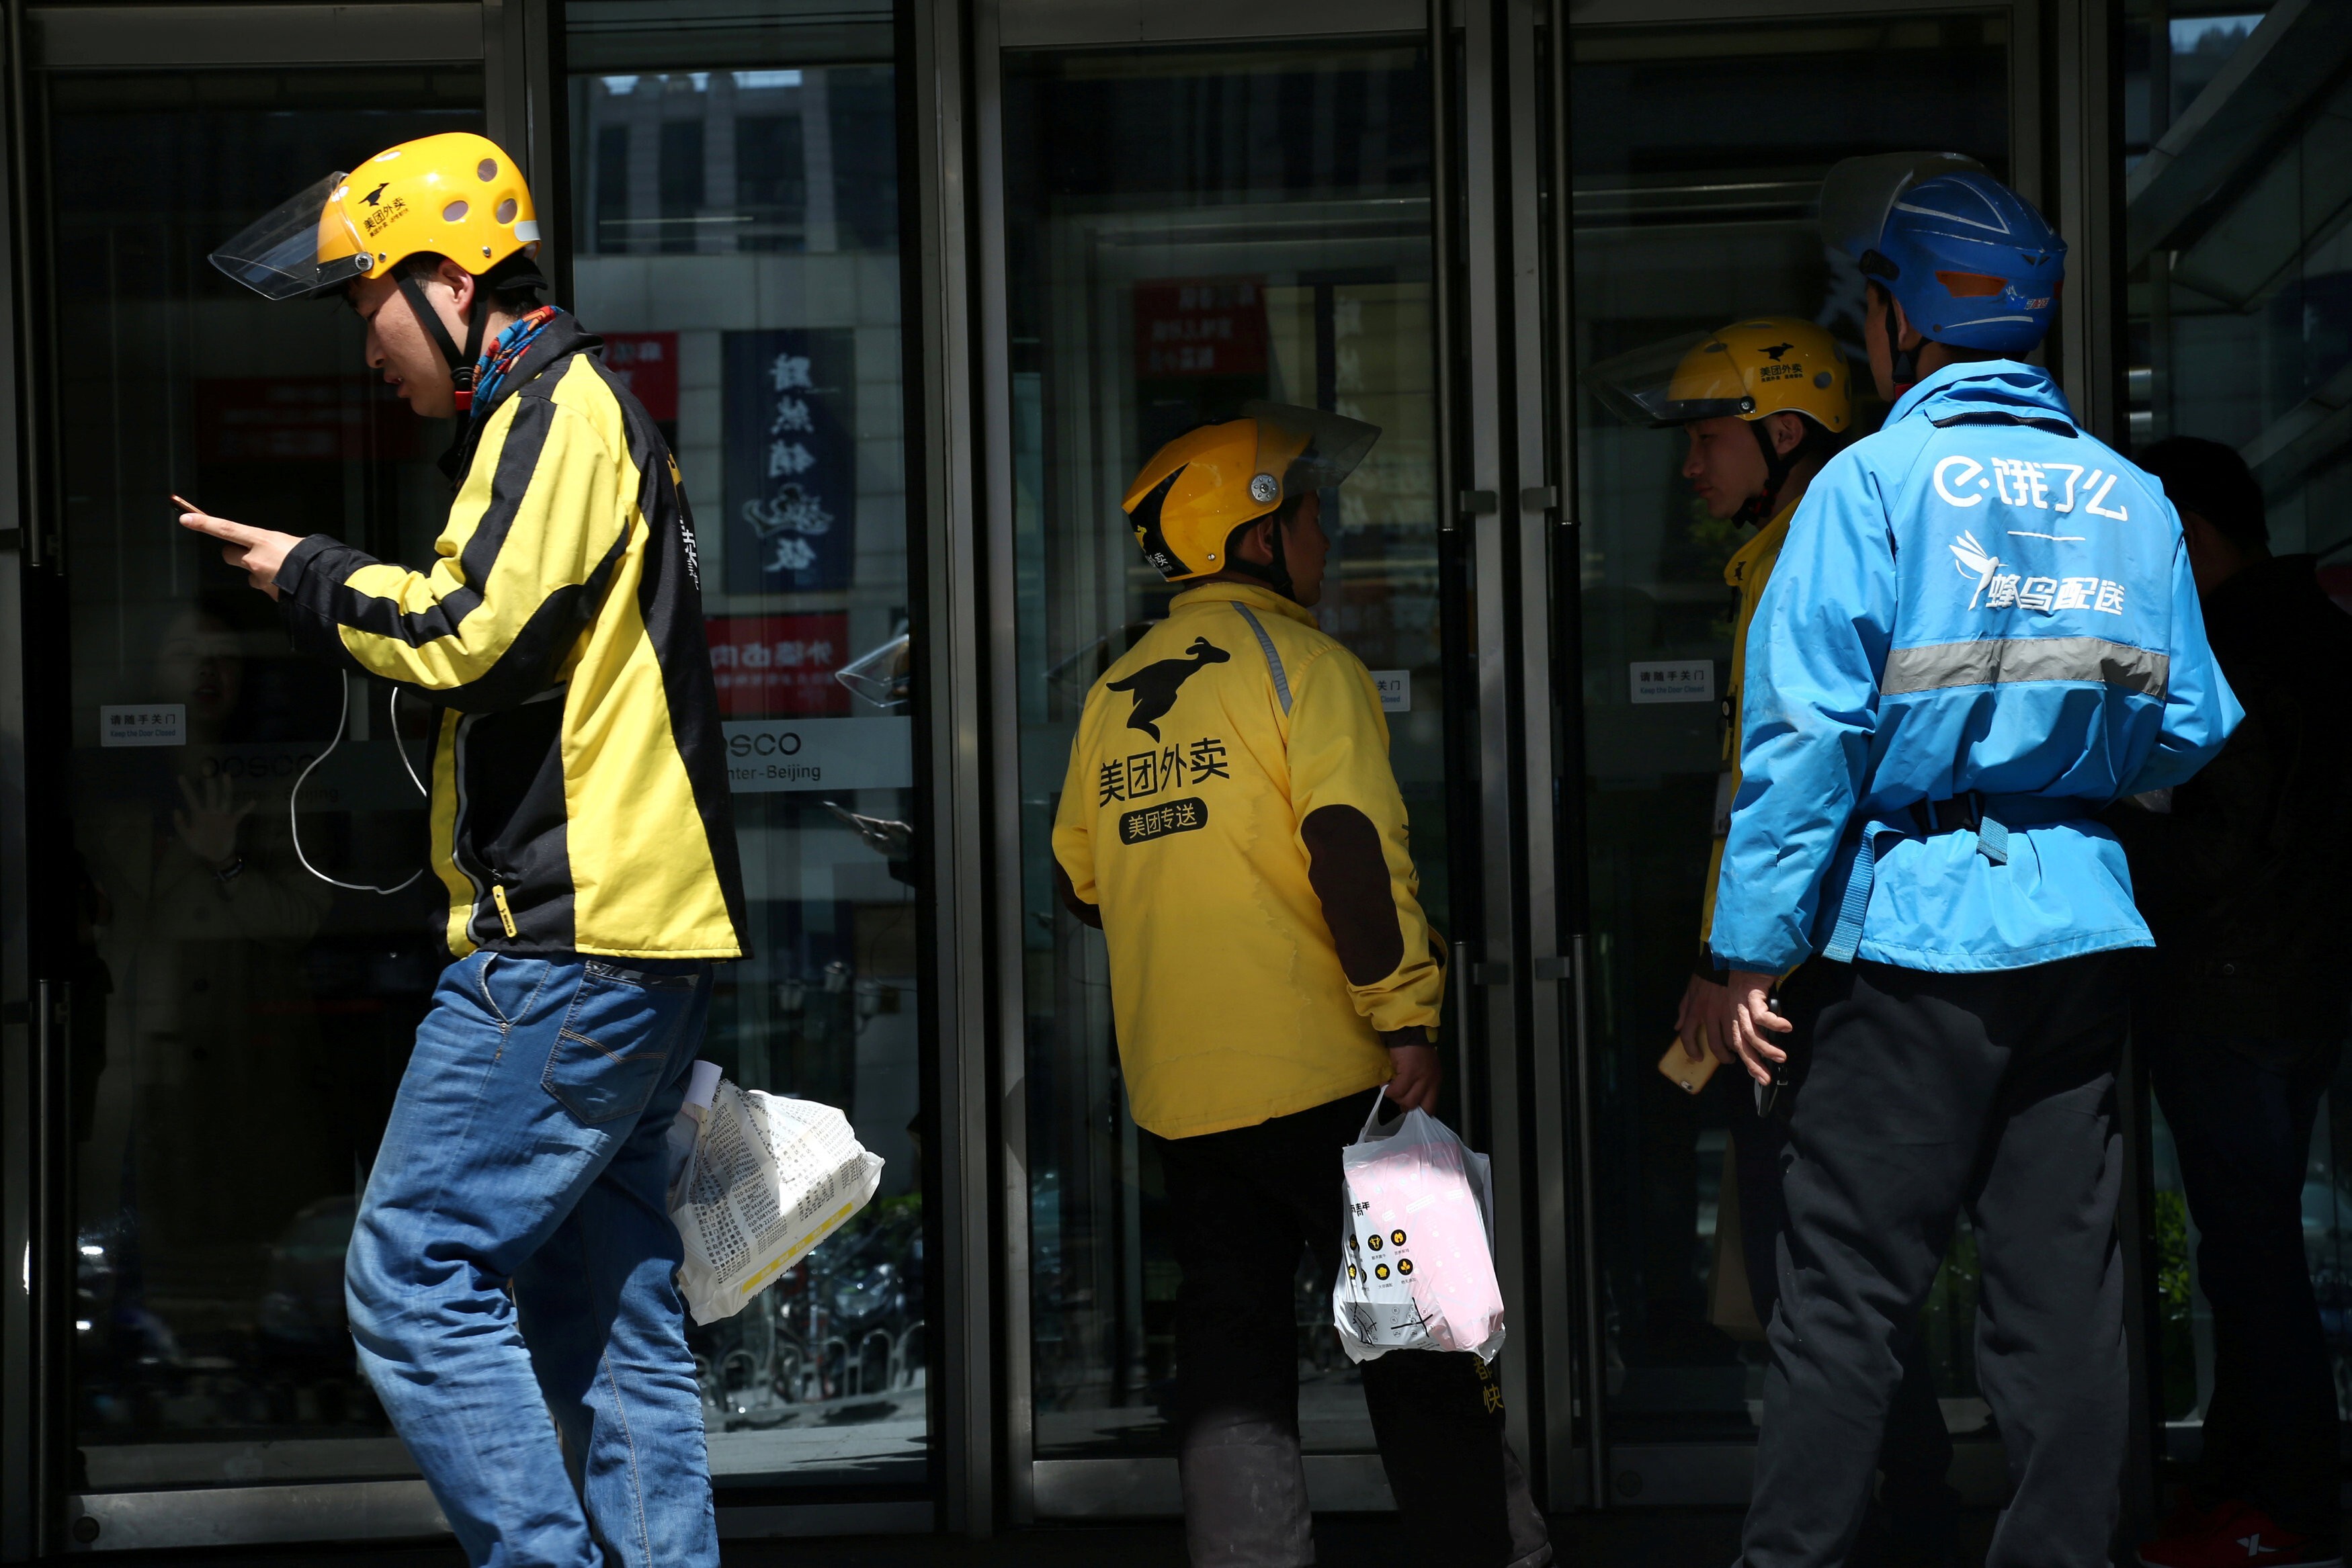 Gig workers from Meituan, in yellow jackets, and those from rival food delivery service Ele.me, in a blue jacket, are shown making deliveries in Beijing on April 11, 2018. Photo: Reuters